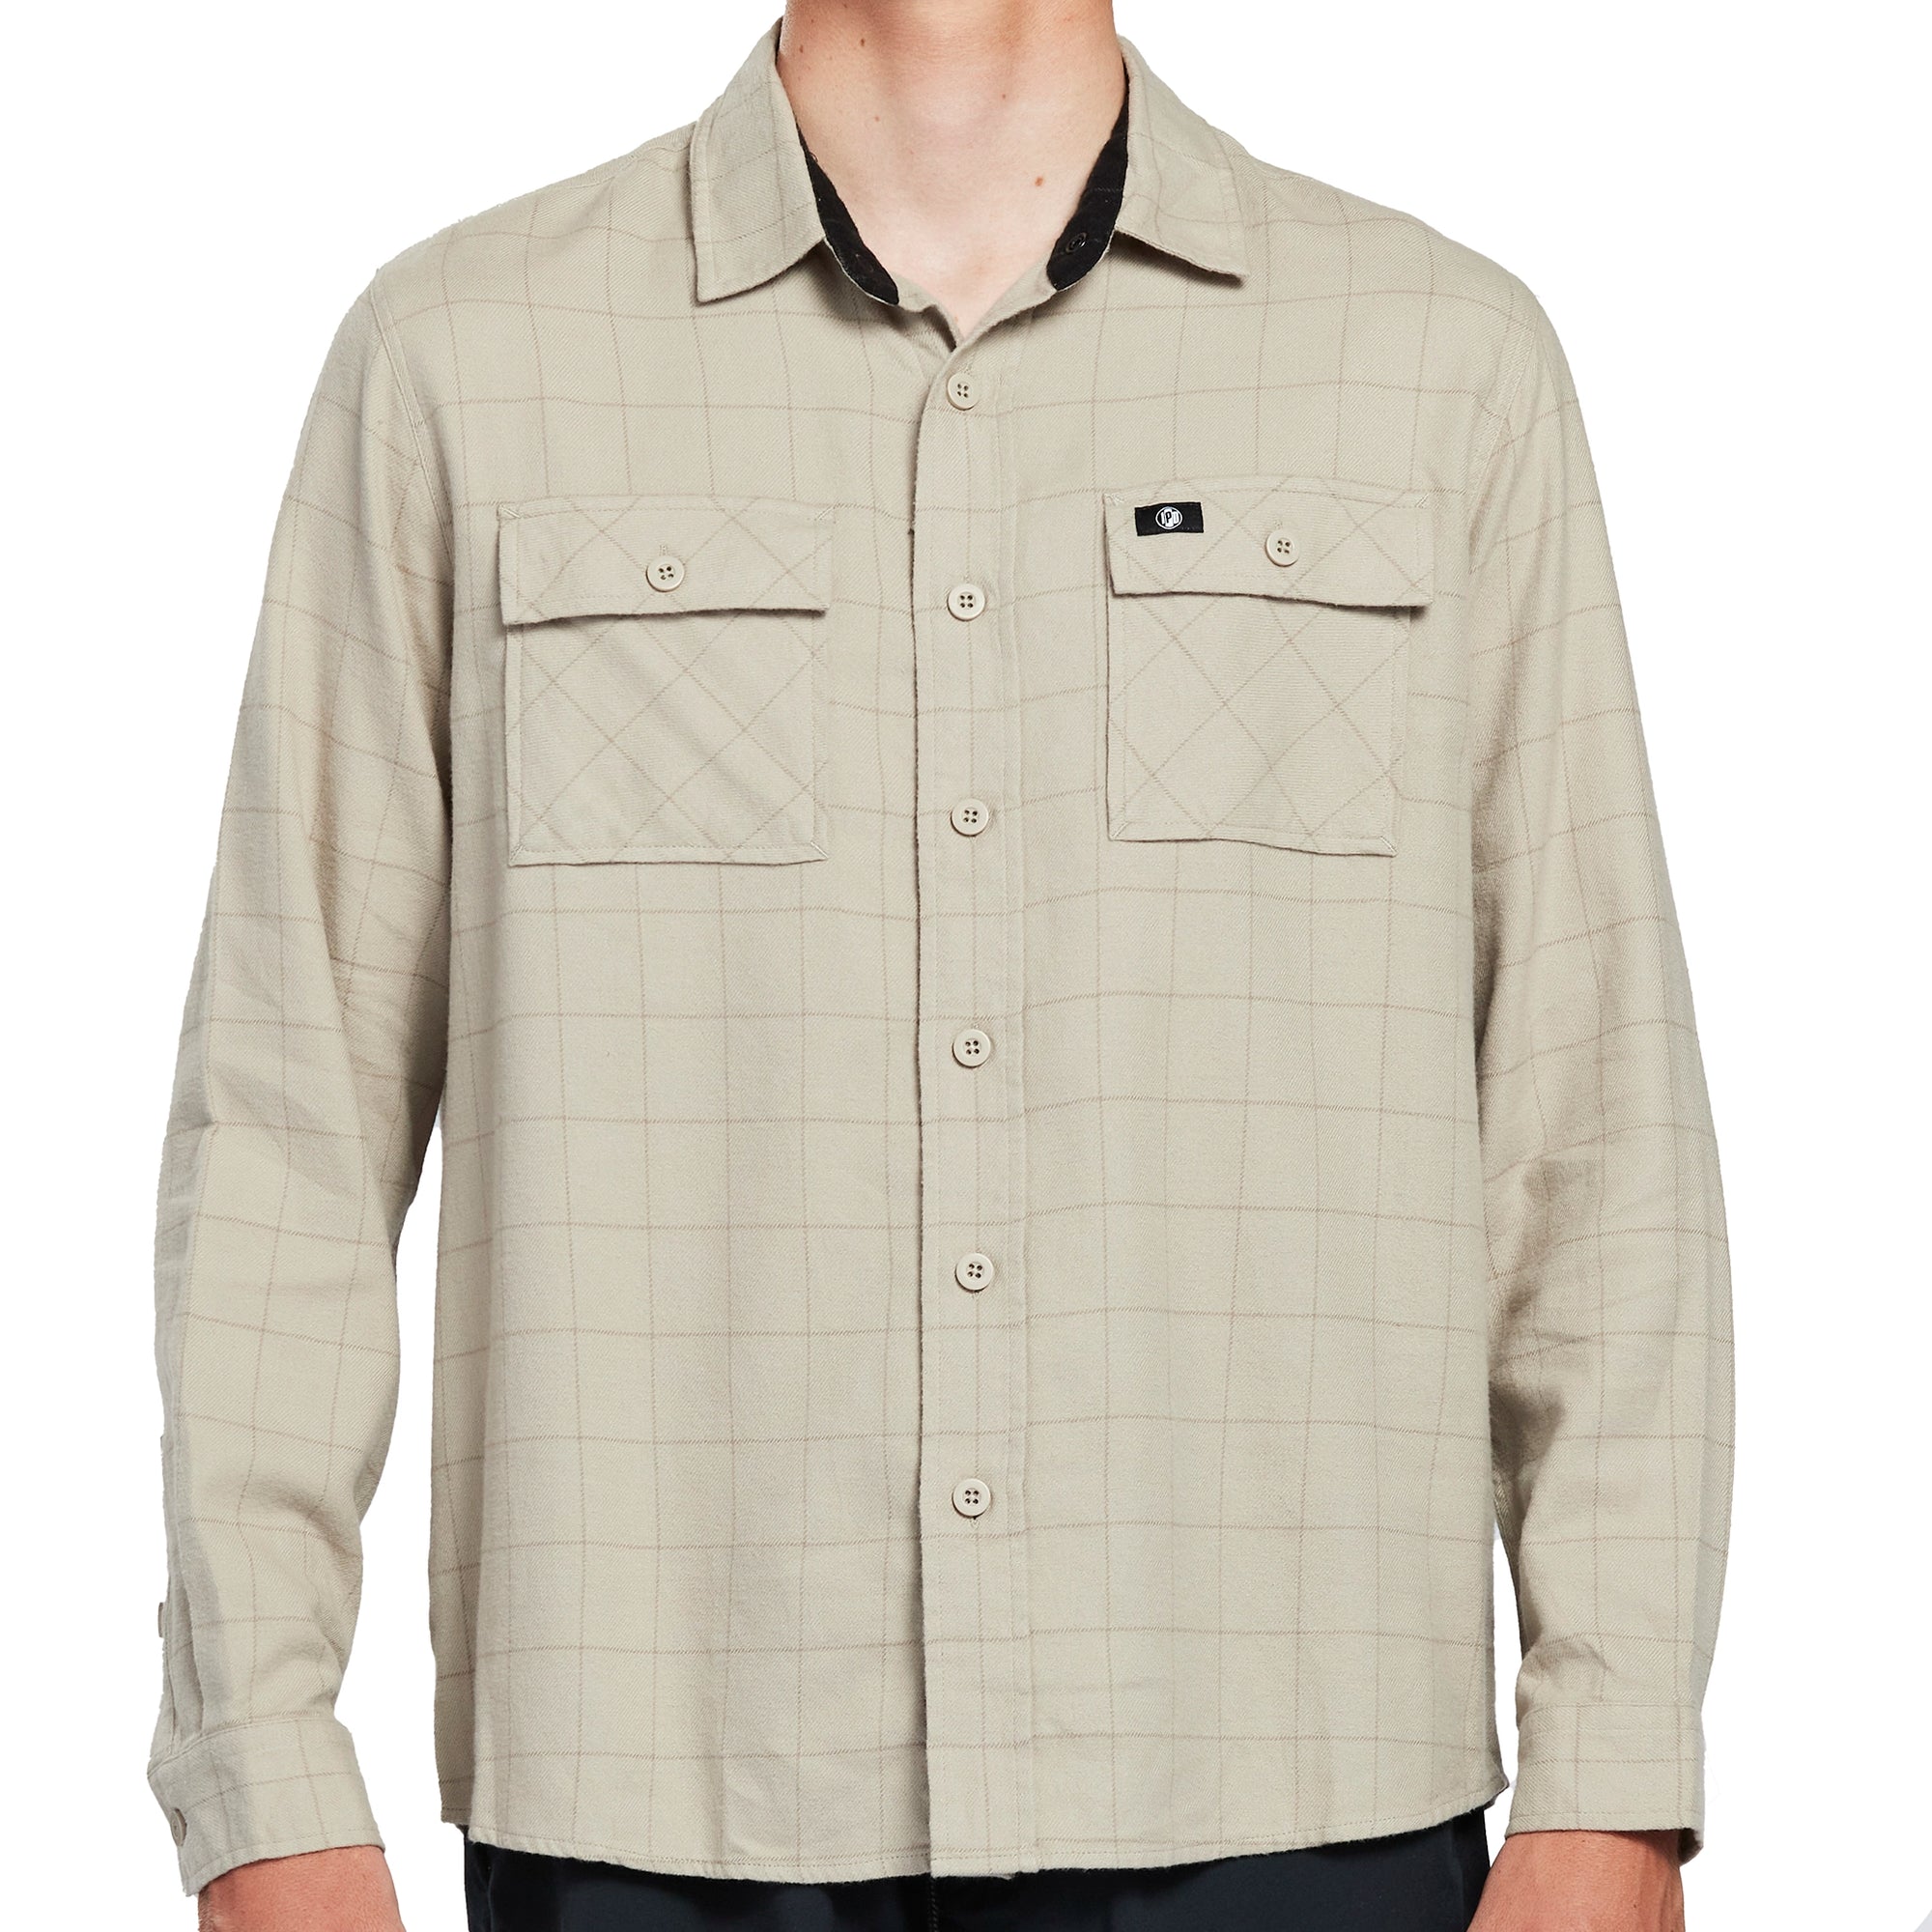 White haze long sleeve button down flannel shirt with dark stripes front.